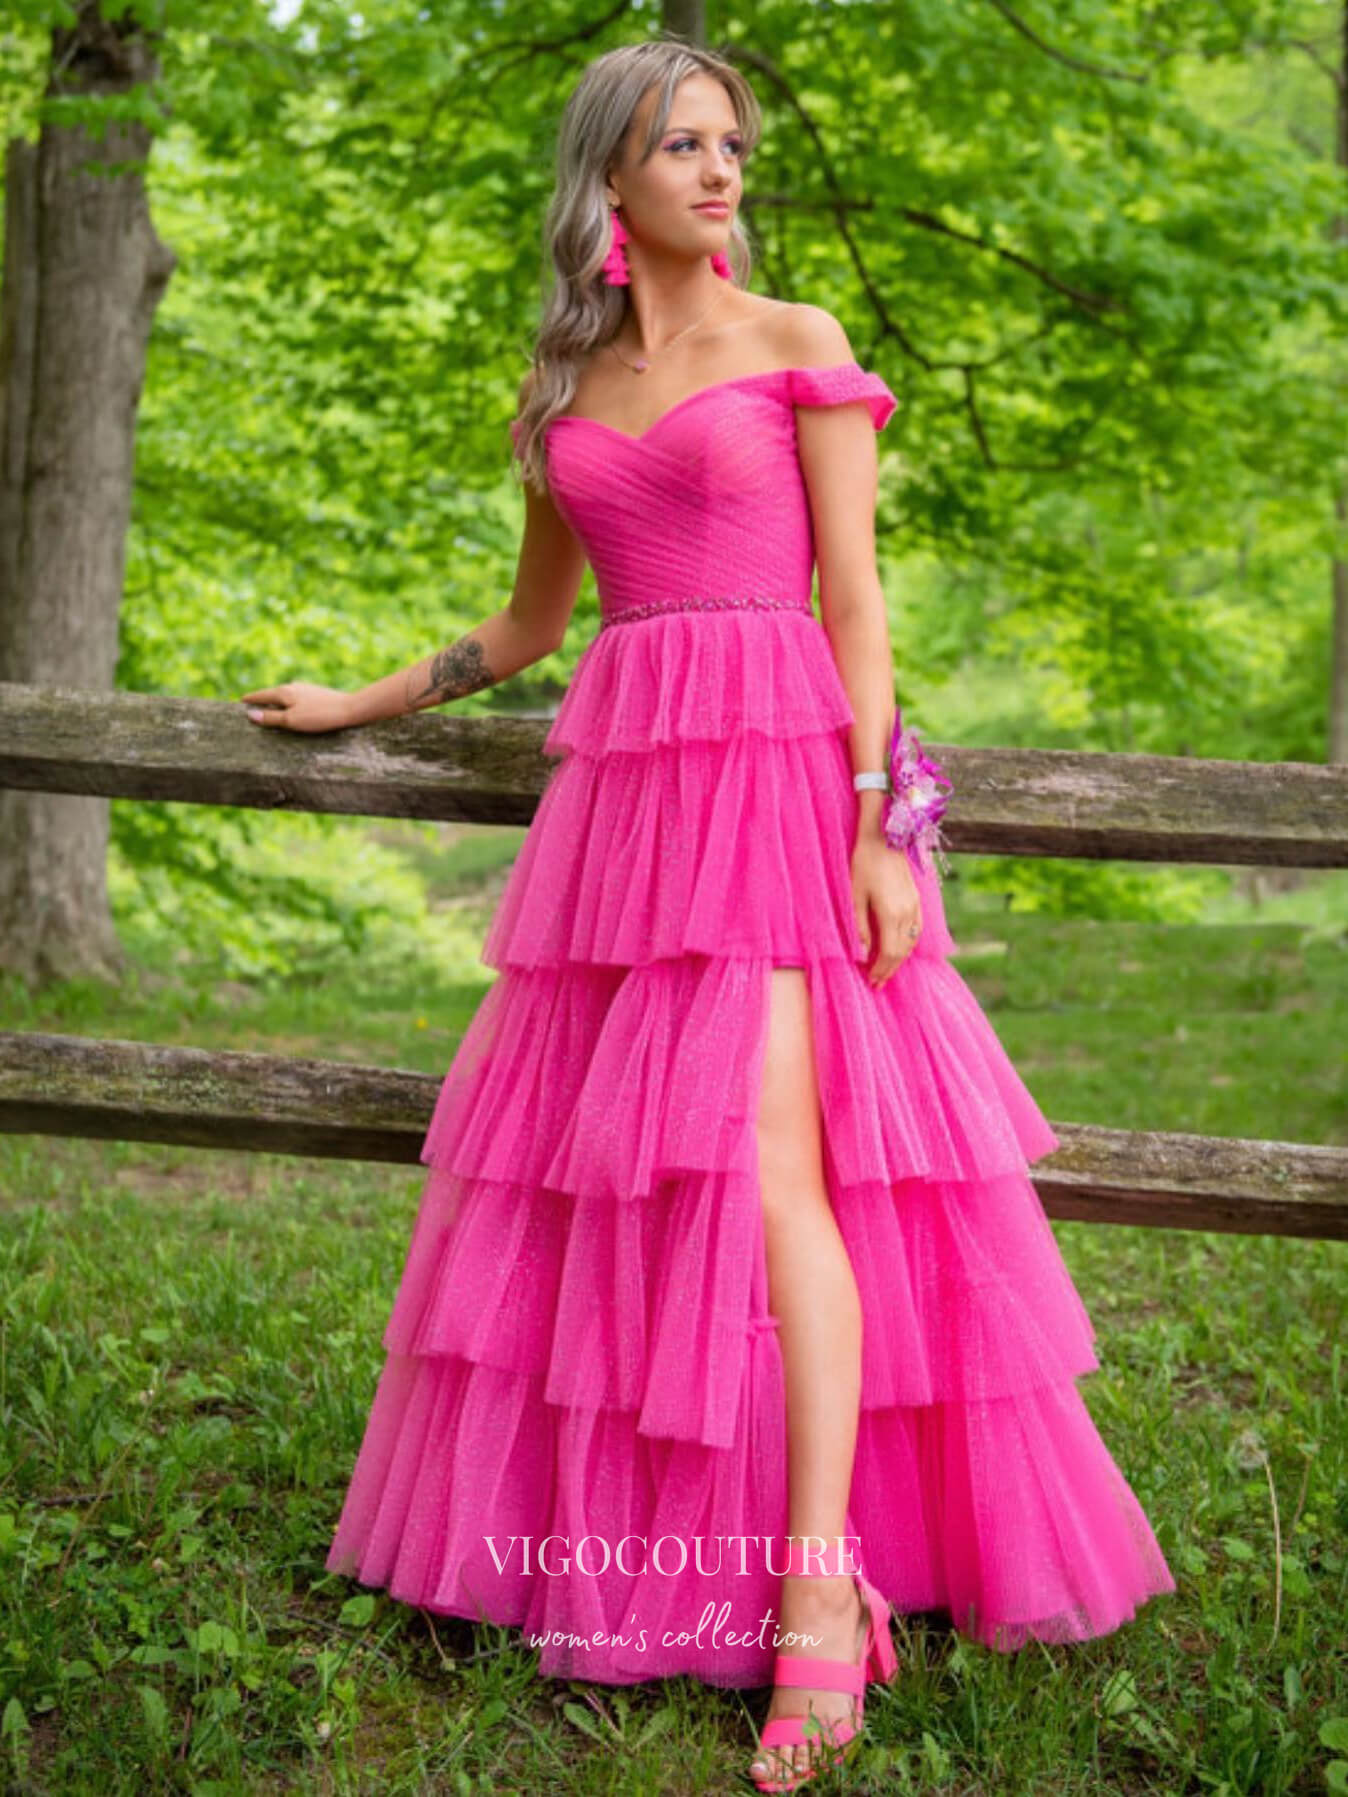 vigocouture-Sparkly Tulle Prom Dresses A-Line Off the Shoulder Formal Dresses 21539-Prom Dresses-vigocouture-Hot Pink-US2-